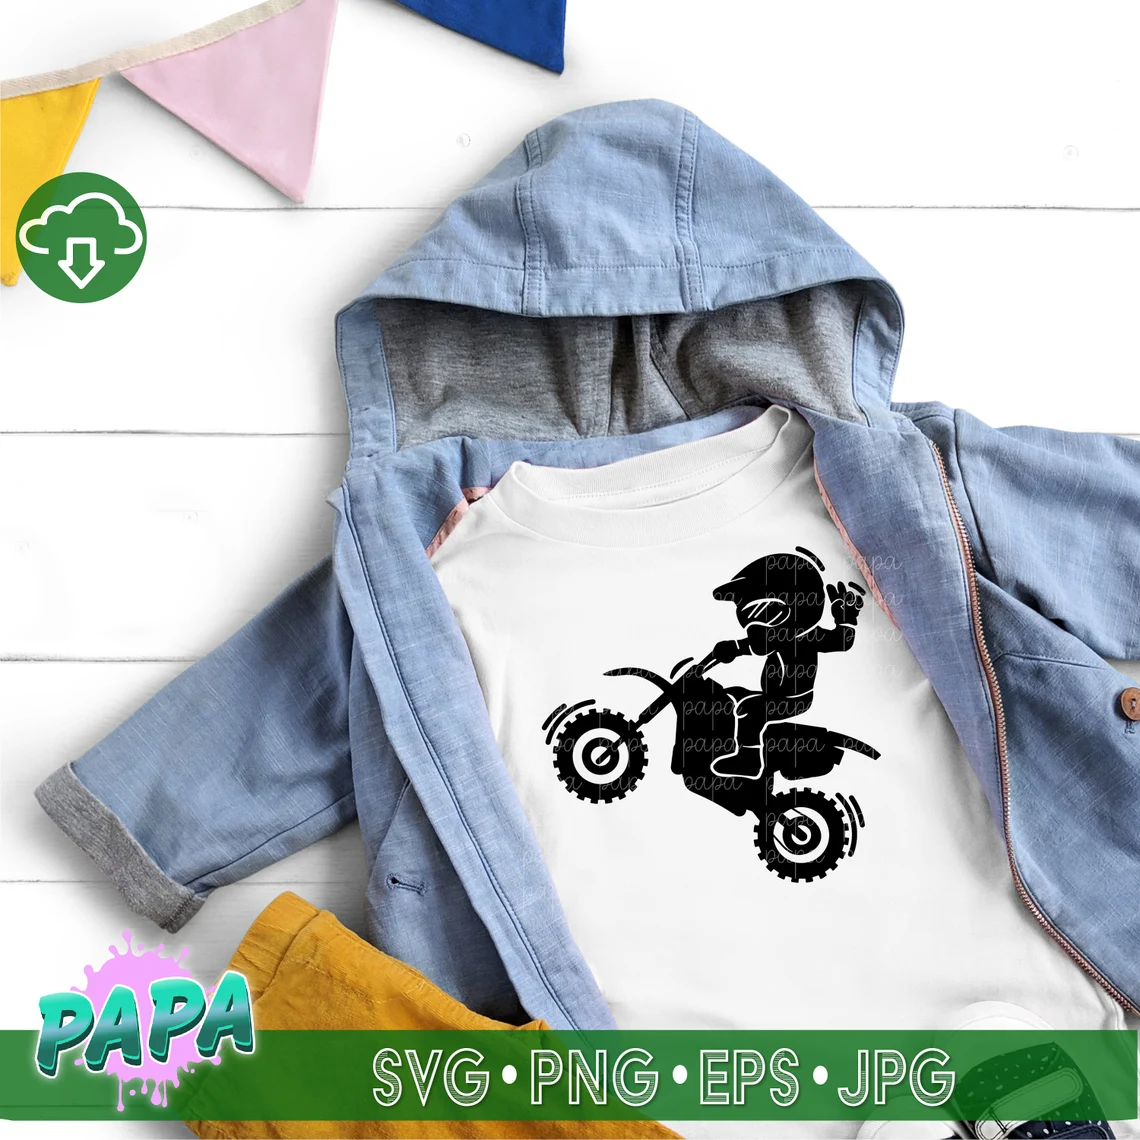 Print on children's clothing with a children's motorcyclist print.